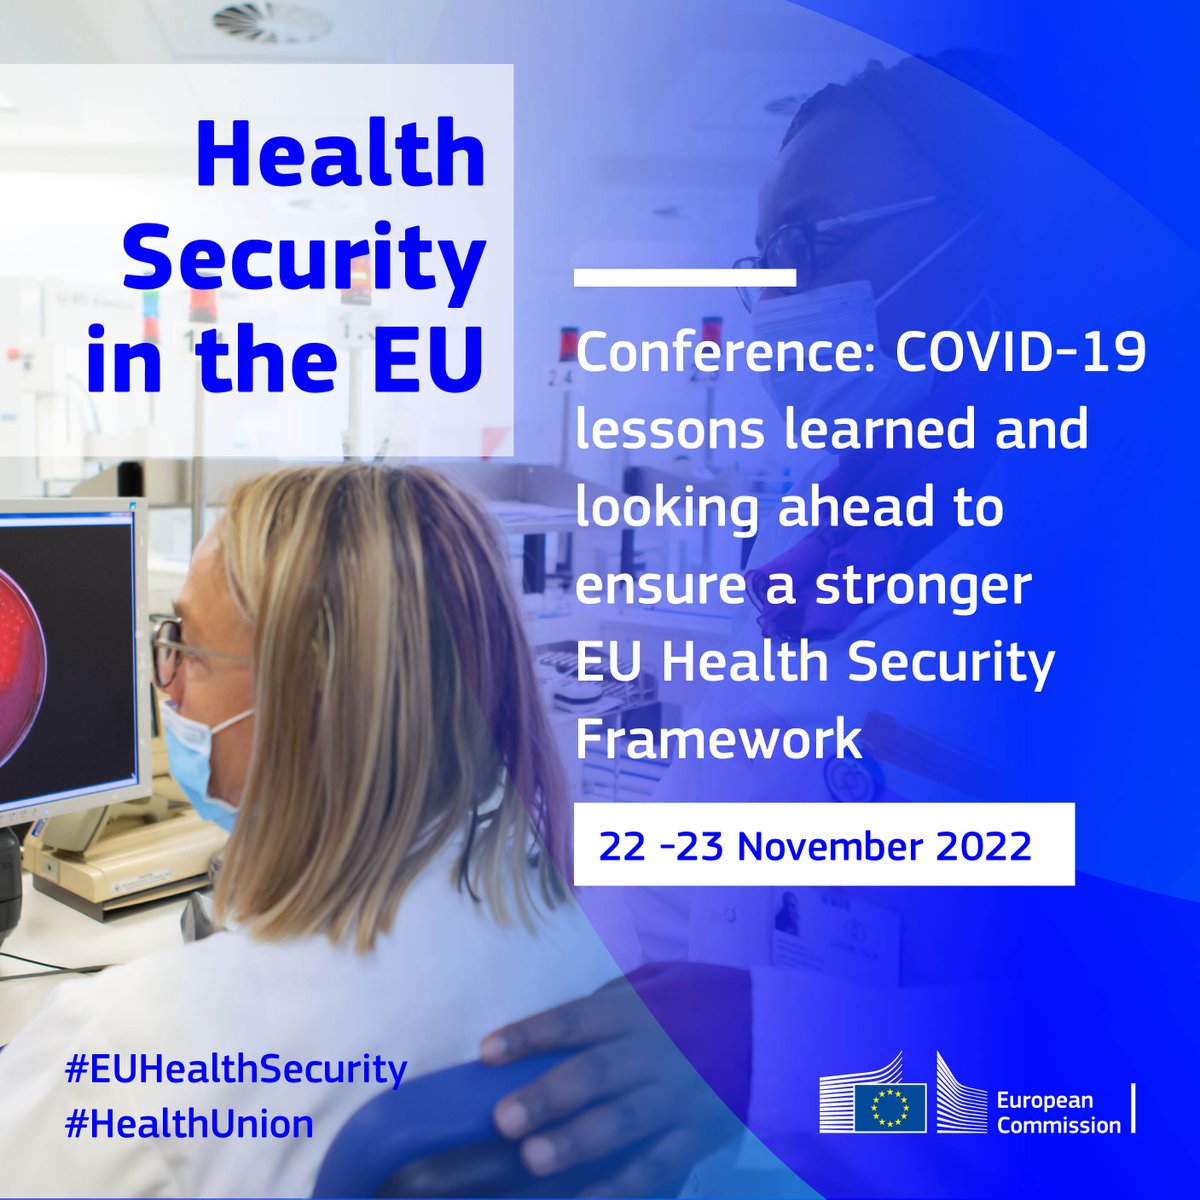 The COVID-19 pandemic taught us many, valuable lessons. See you in Luxembourg as we discuss the🆕Regulation on cross-border health threats & more ways to ensure a stronger #EUHealthSecurity Framework Registration open now: cll-conference.eu #HealthUnion